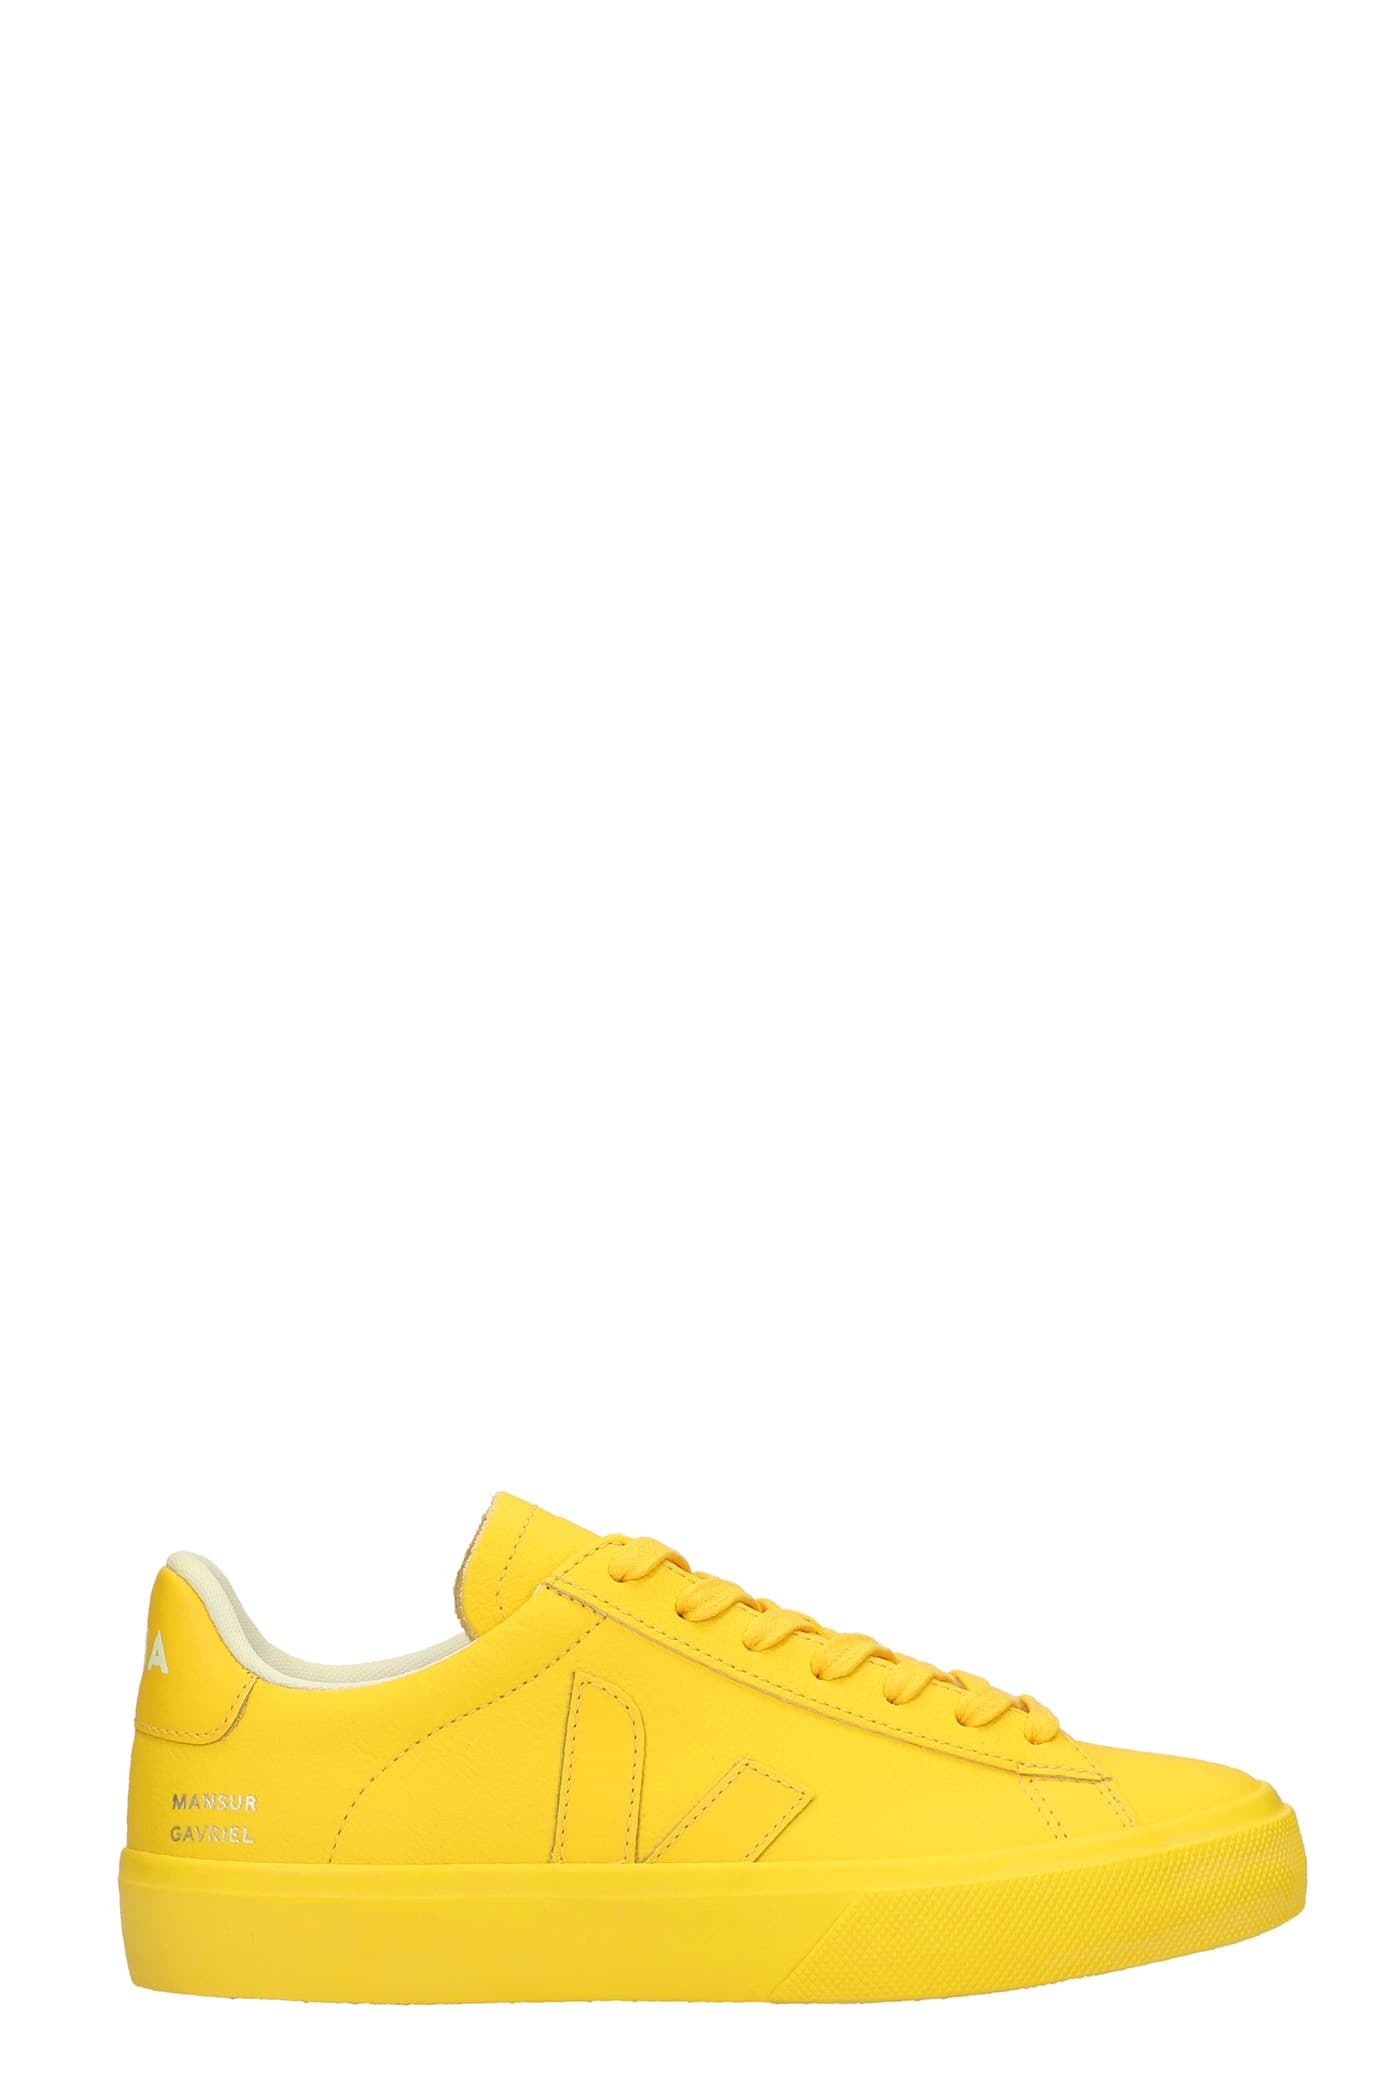 Veja Campo Sneakers In Yellow Leather